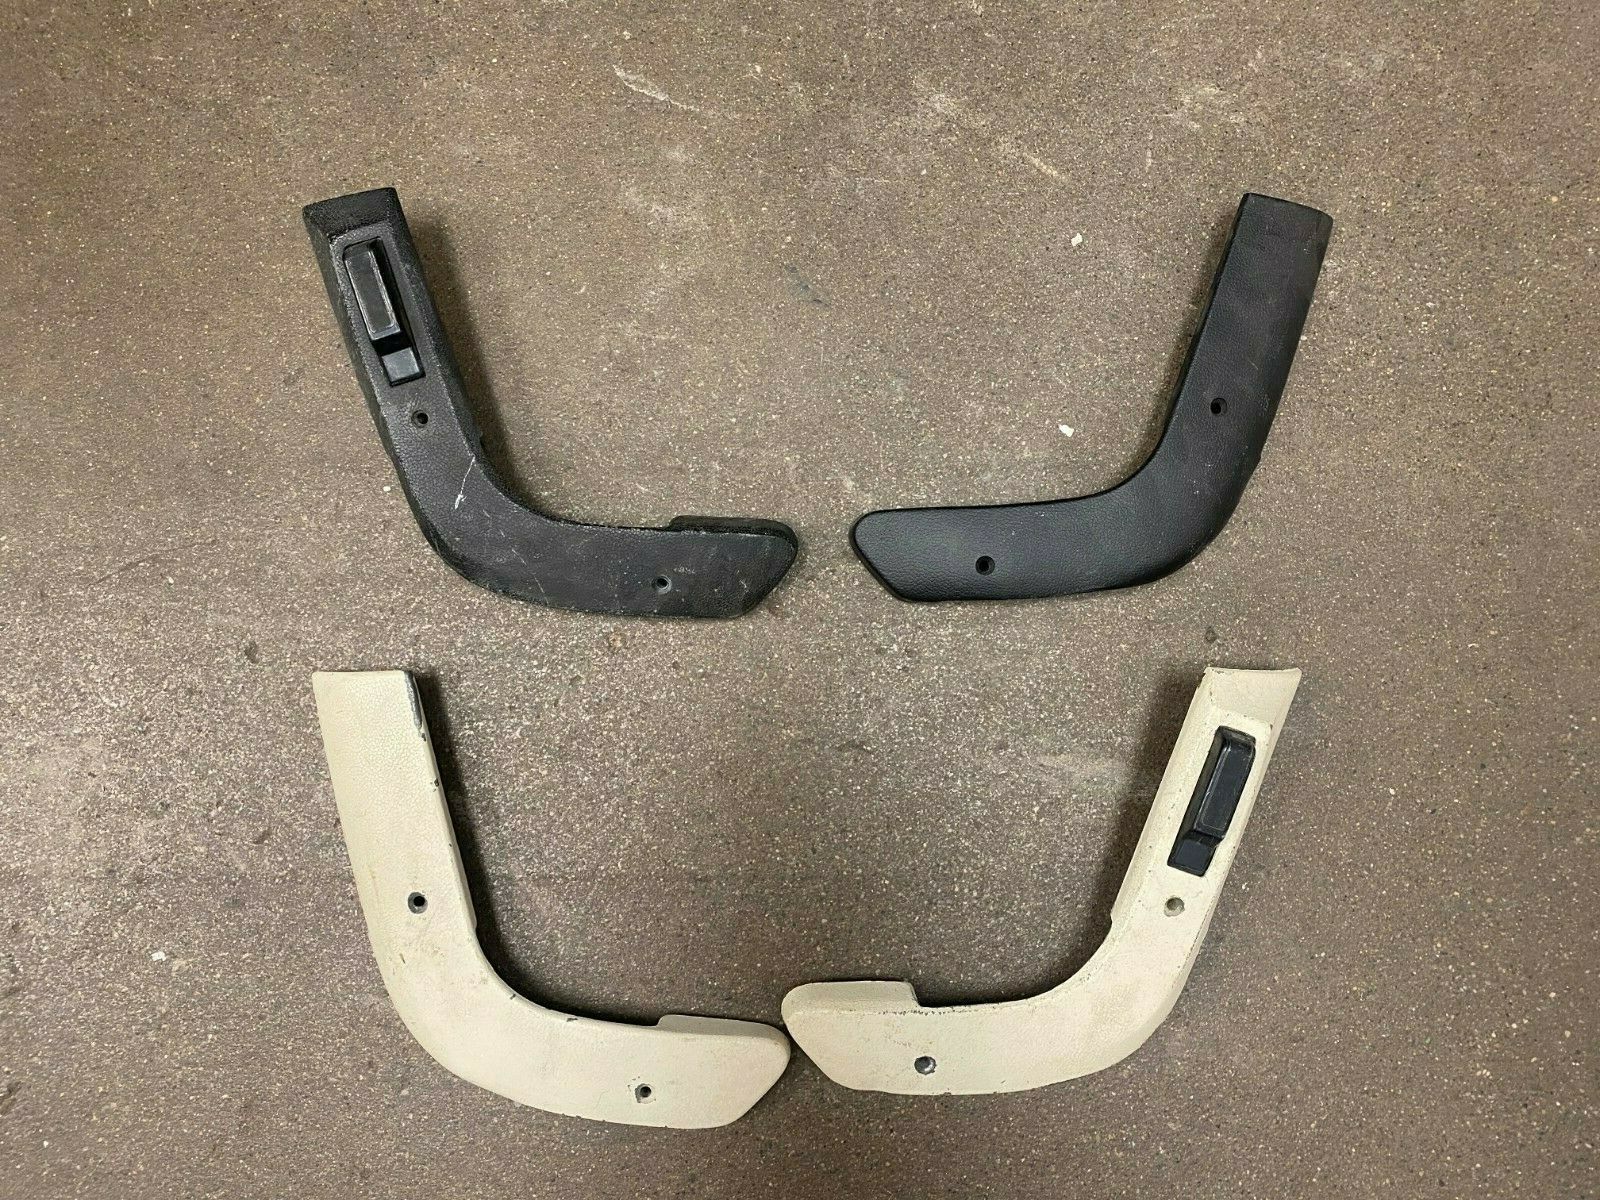 Set Seat Hinge Cover For 1970 E Body Bucket Seat Cuda, Challenger